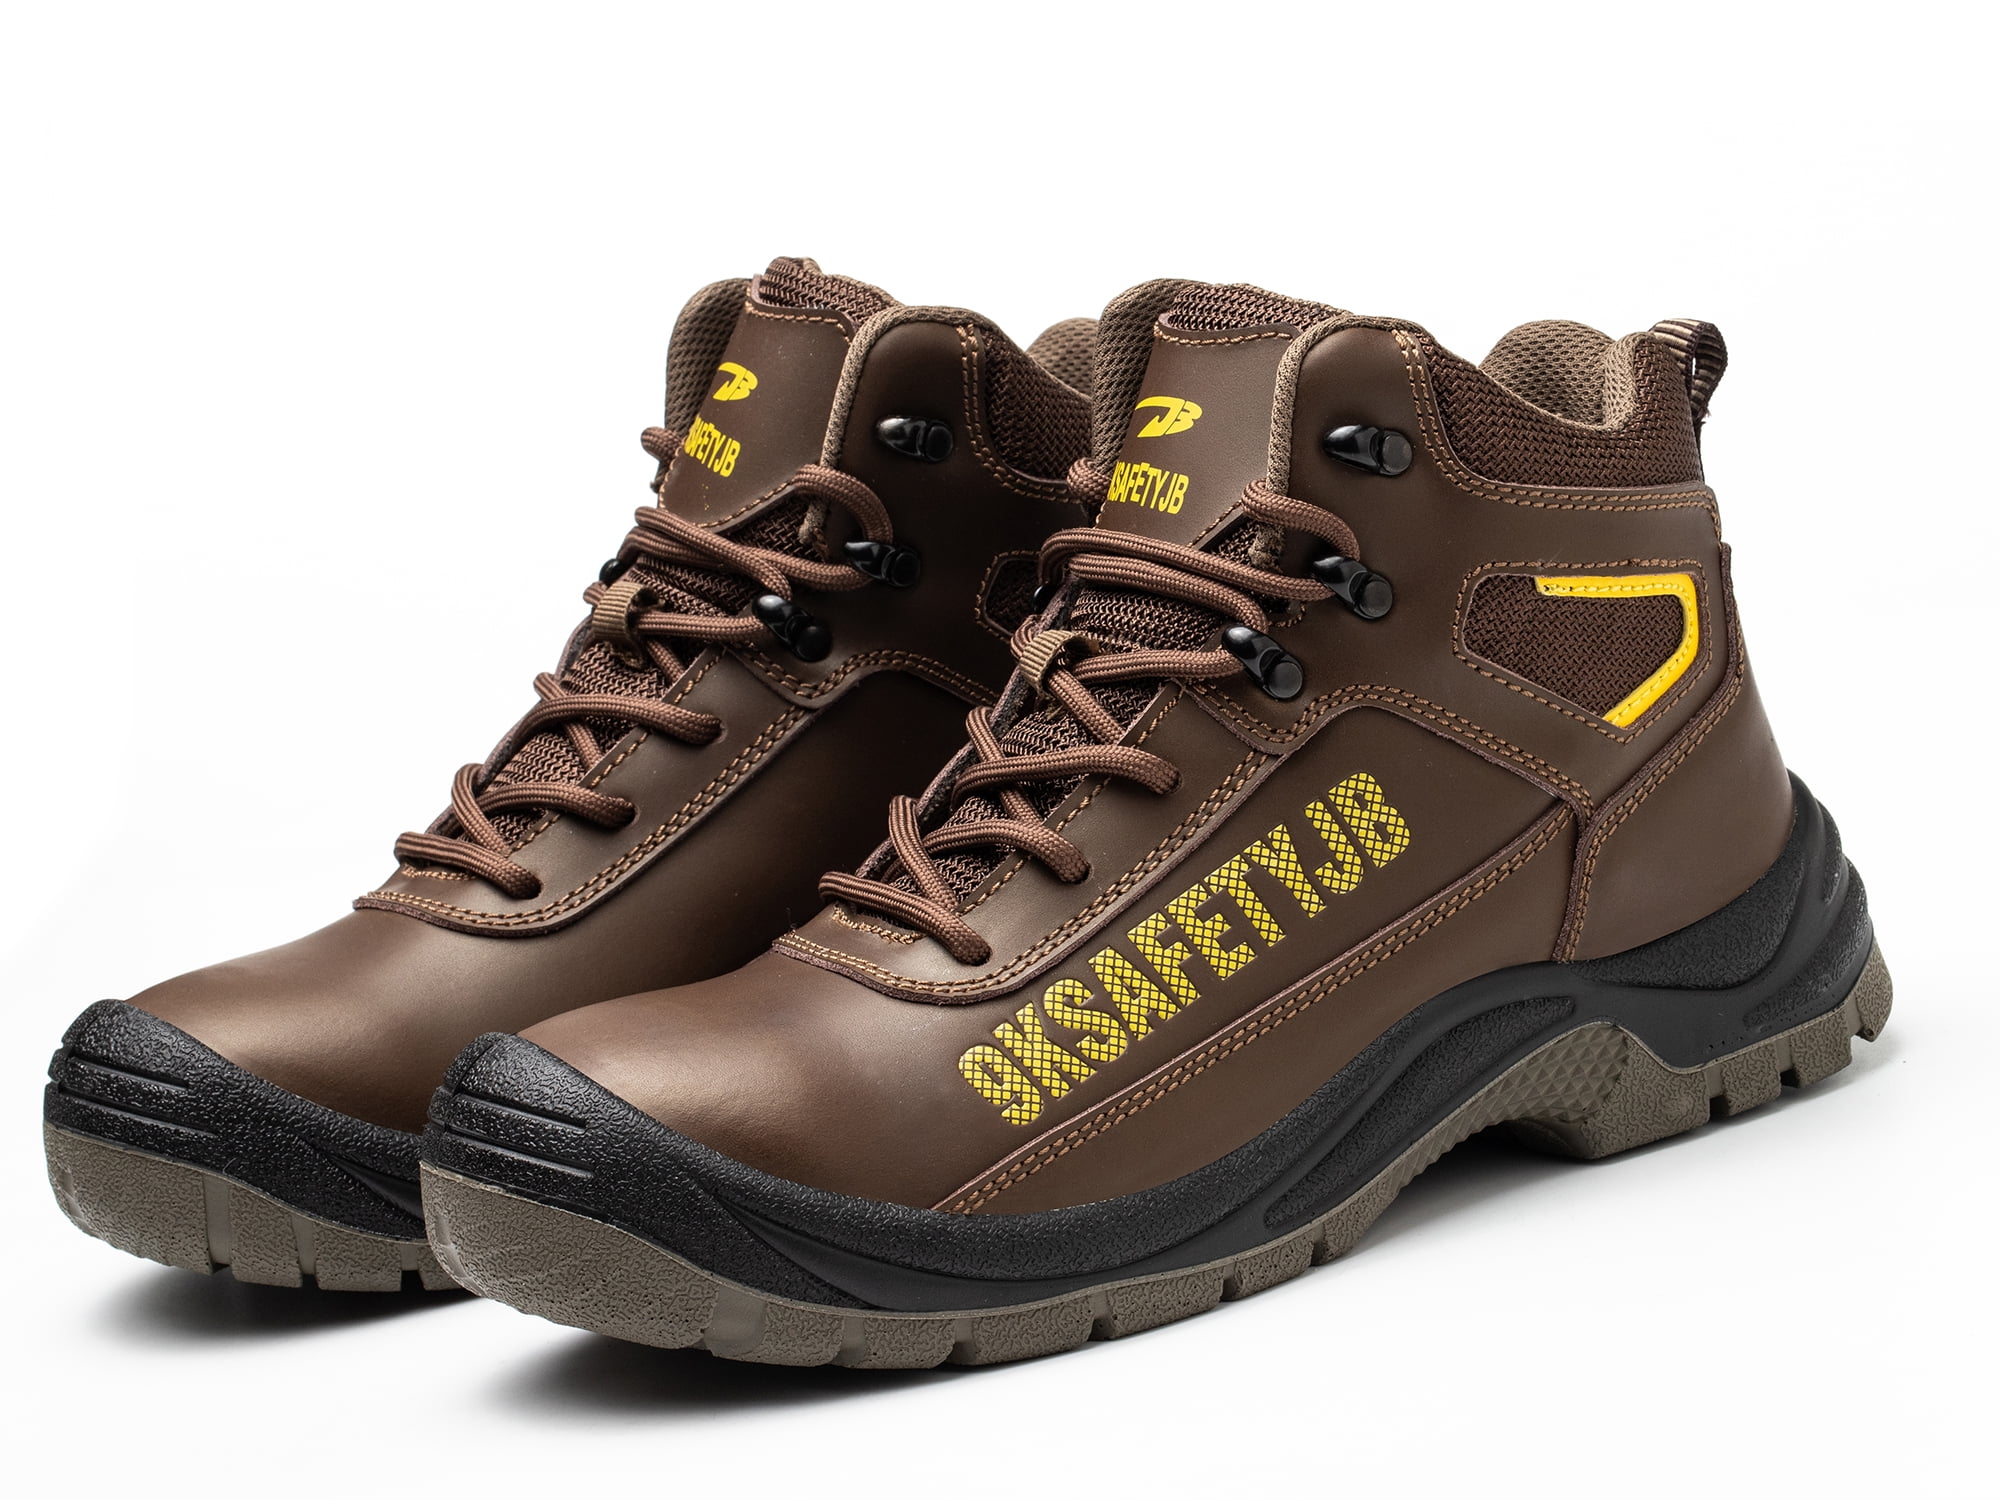 Men's Safety Shoes Steel Toe Work Boots Indestructible Waterproof Boots Slip On